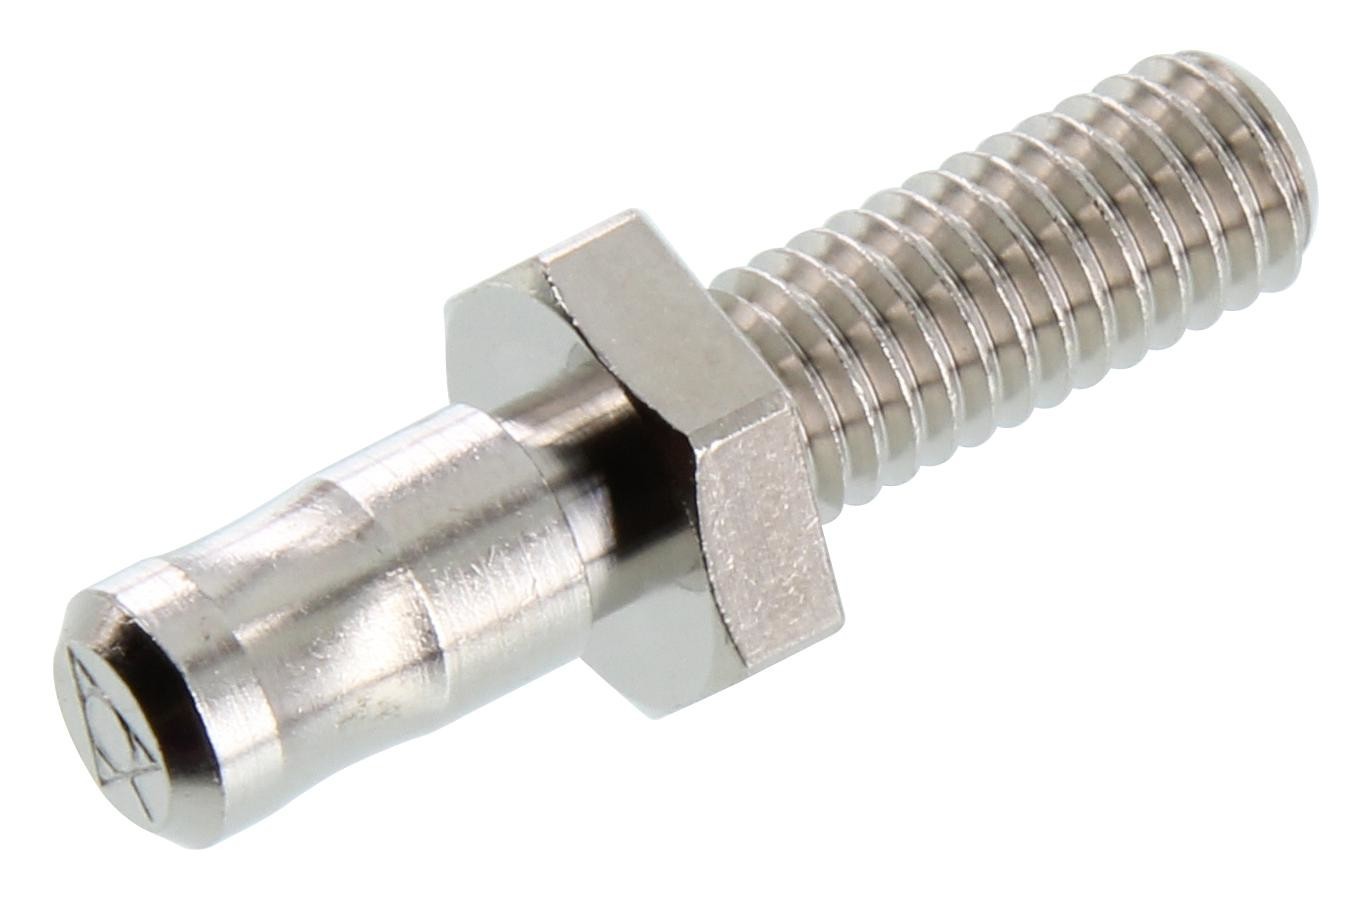 Staubli 04.0056 6mm Plug Connector, Potential Equalization, Brass, NIckle Plated, 30mm